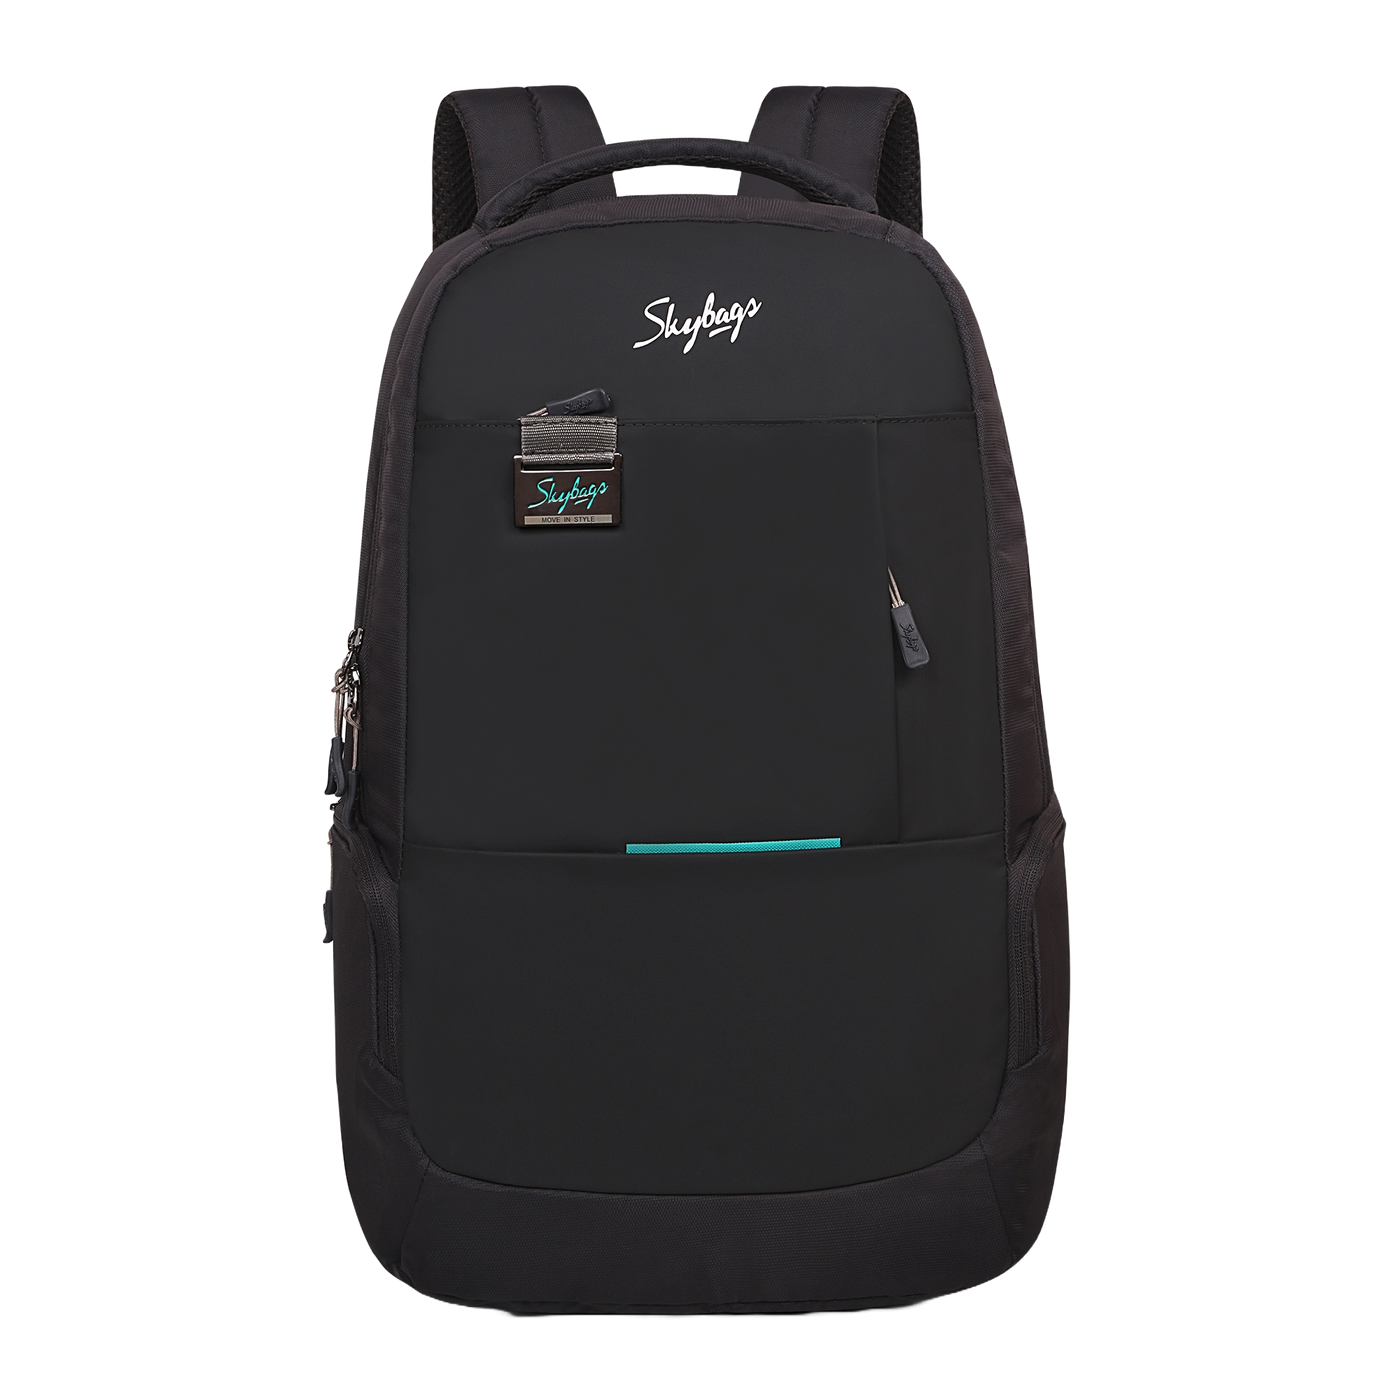 Buy Skybags Chester Plus Laptop Backpack Blue at Amazon.in